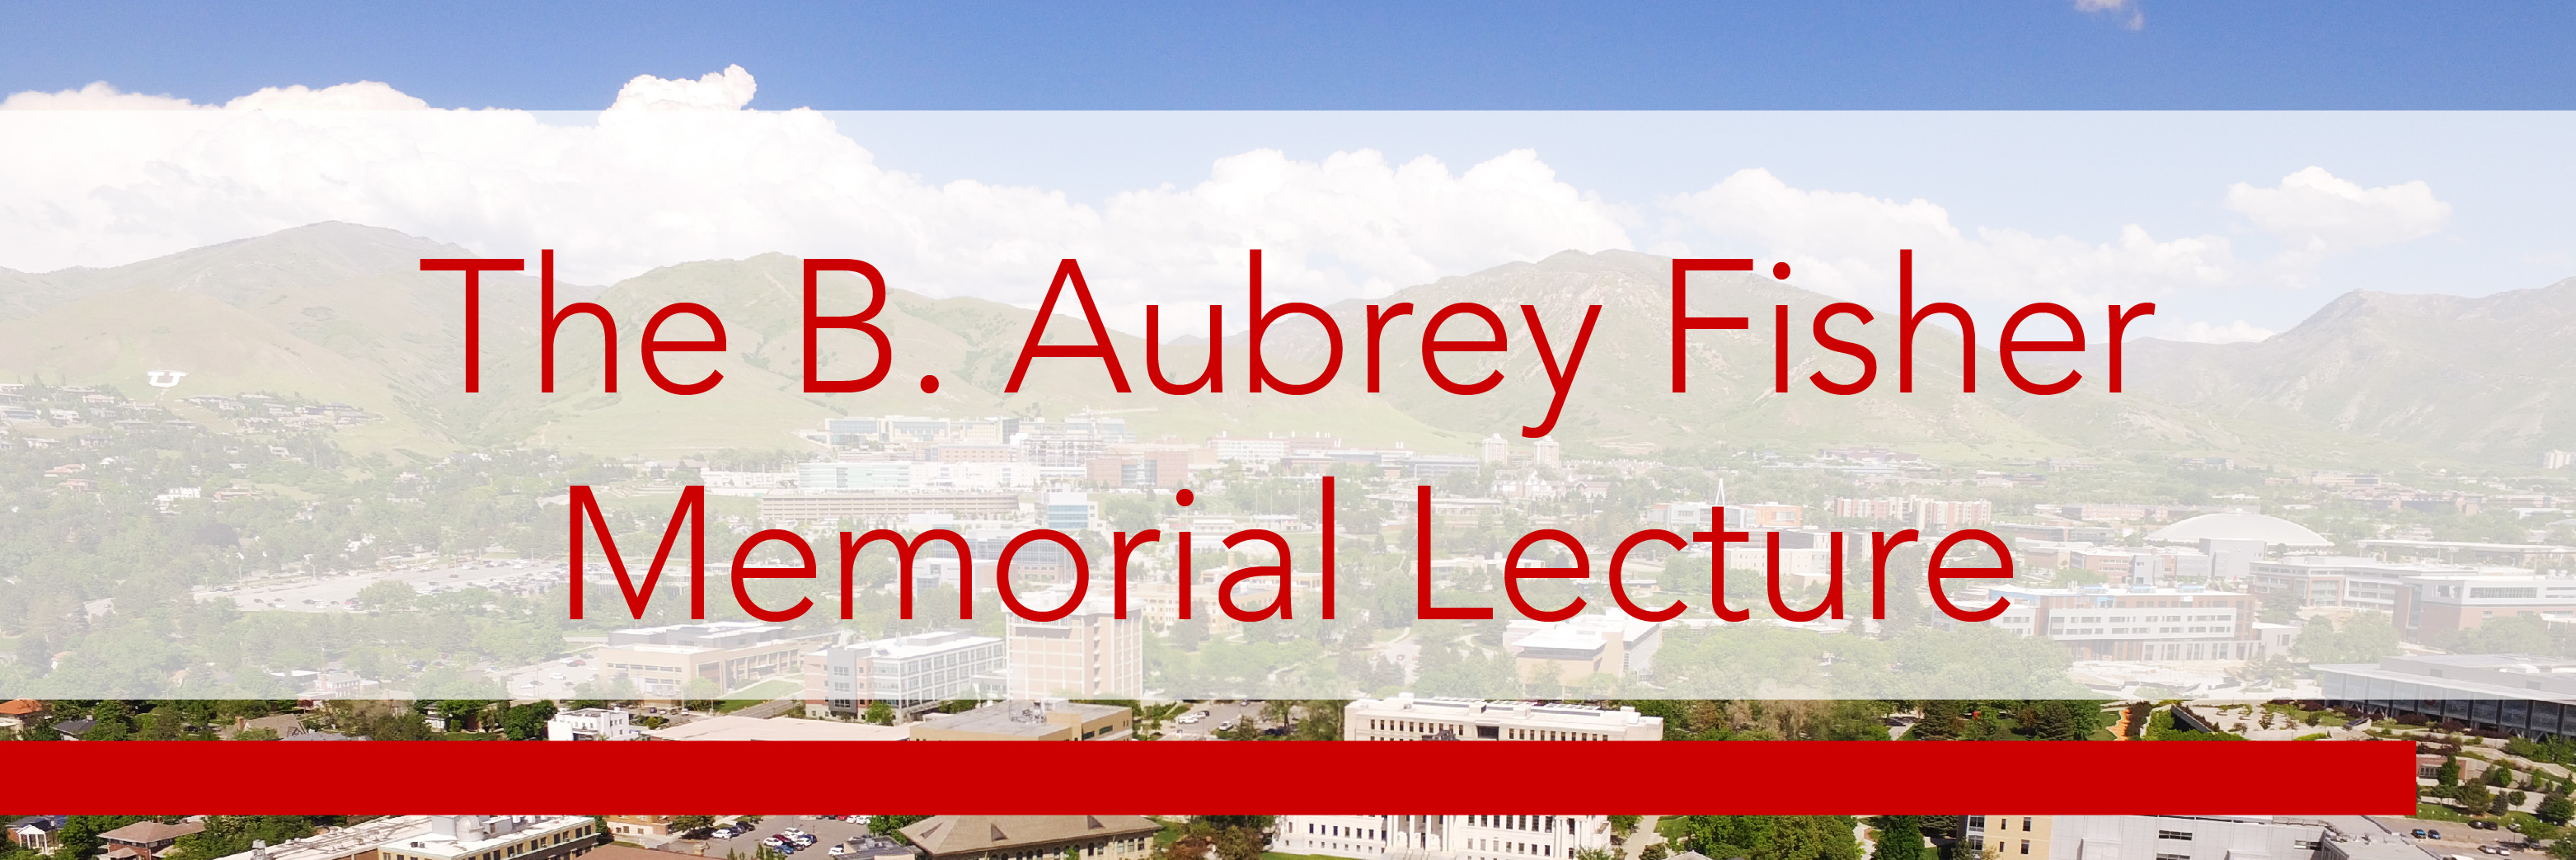 The B. Aubrey Fisher Memorial Lecture